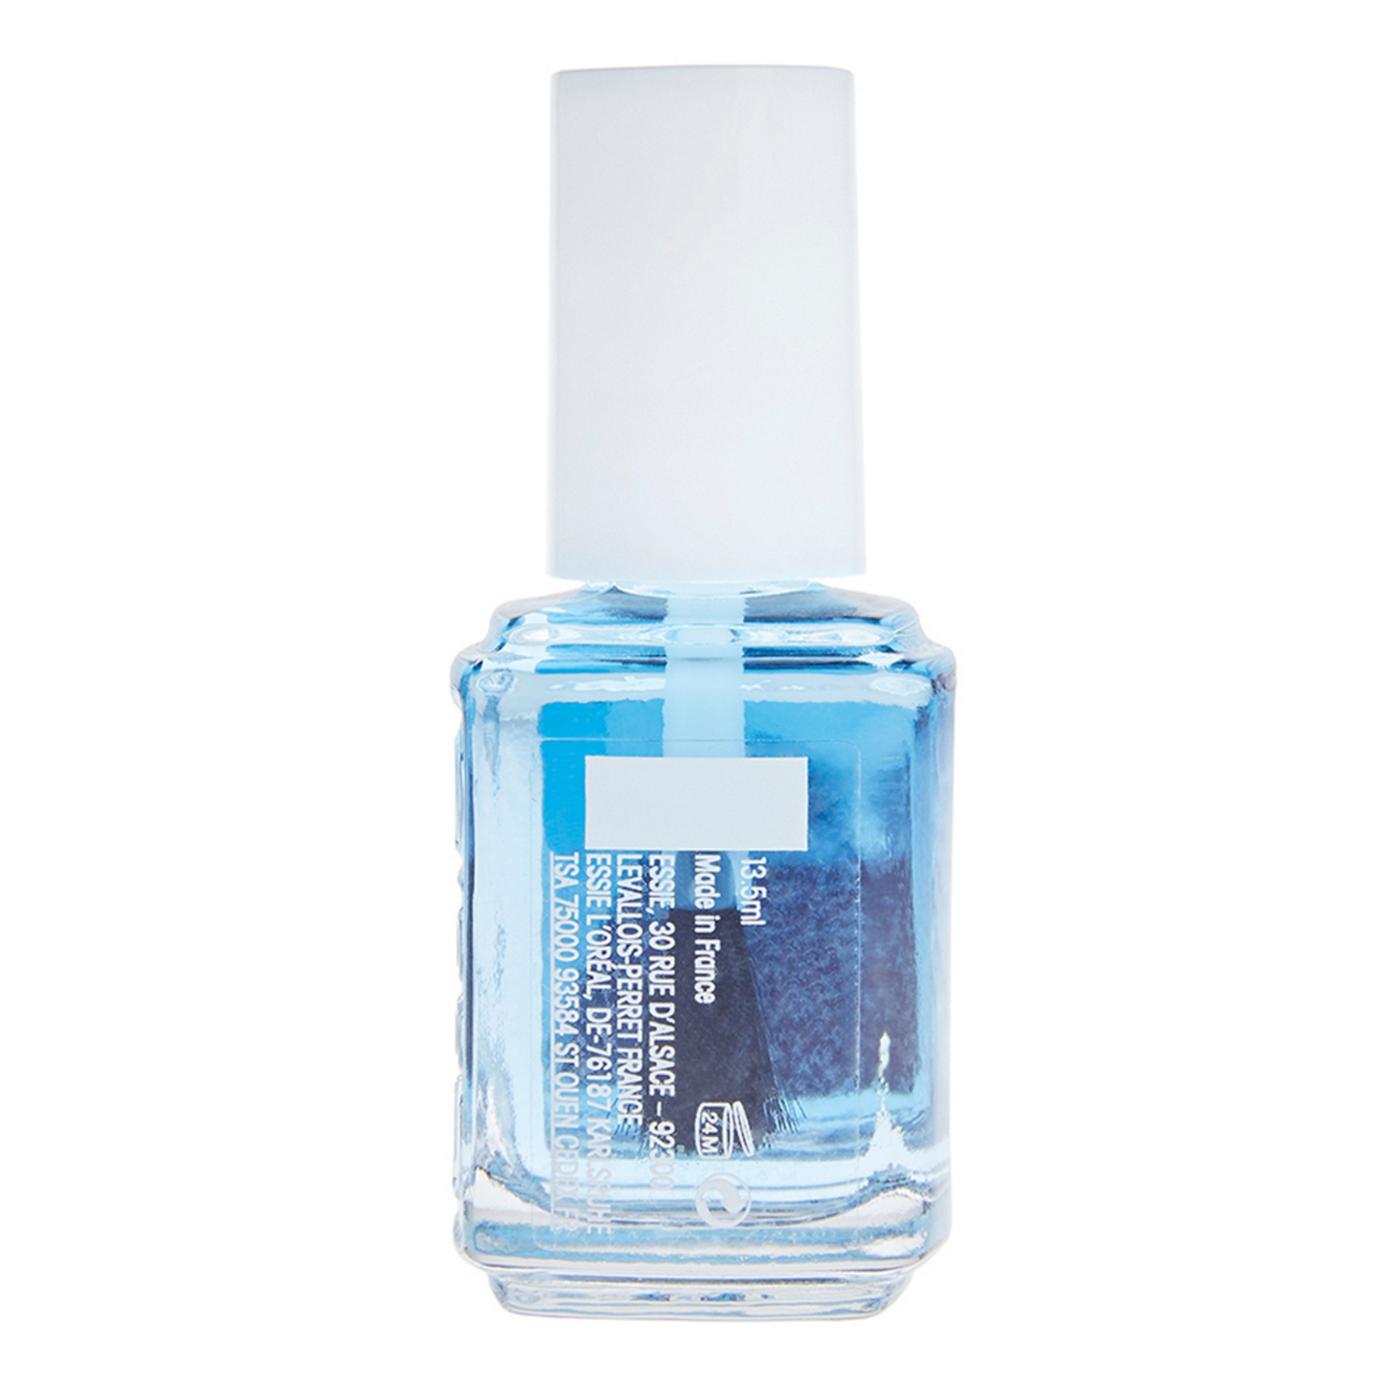 essie All In One Base + Top Coat + Strengthener Nail Treatment; image 9 of 16